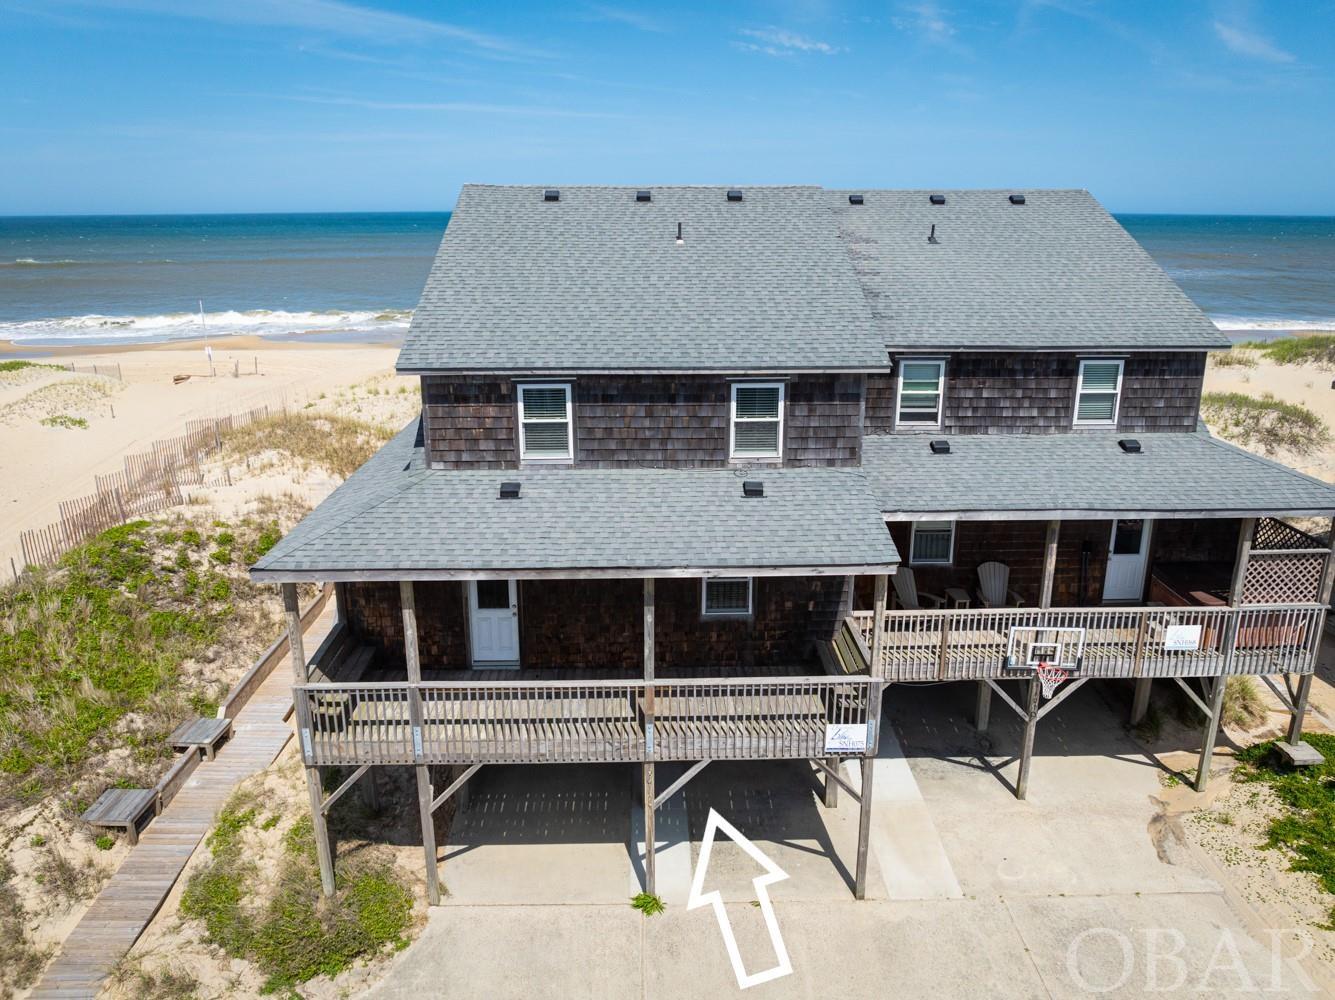 9601 Old Oregon Inlet Road, Nags Head, NC 27959, 4 Bedrooms Bedrooms, ,3 BathroomsBathrooms,Residential,For sale,Old Oregon Inlet Road,125589